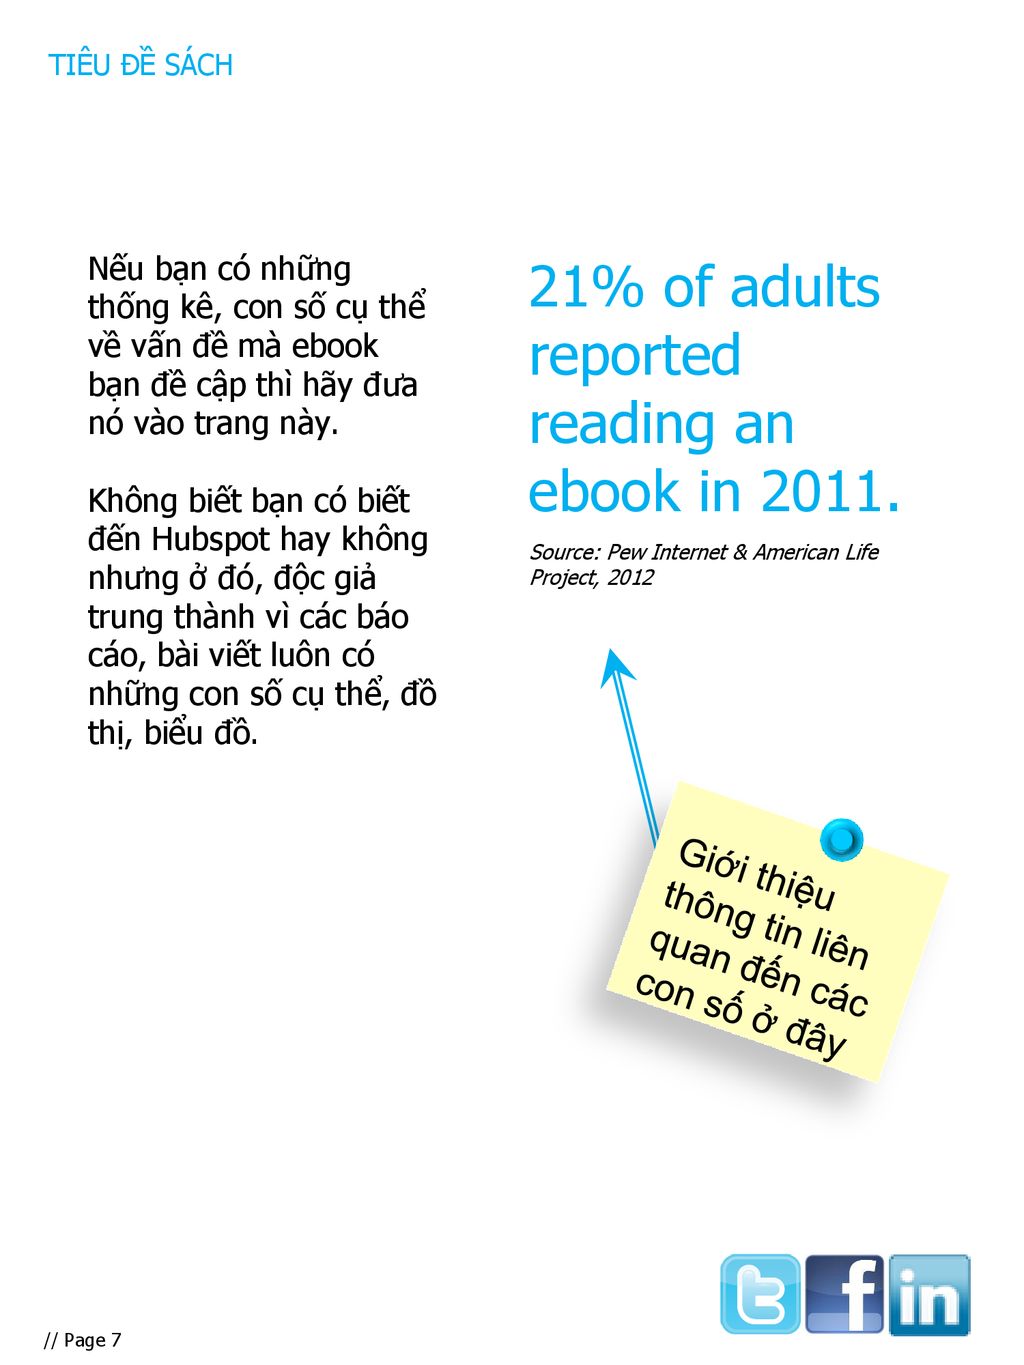 21% of adults reported reading an ebook in 2011.